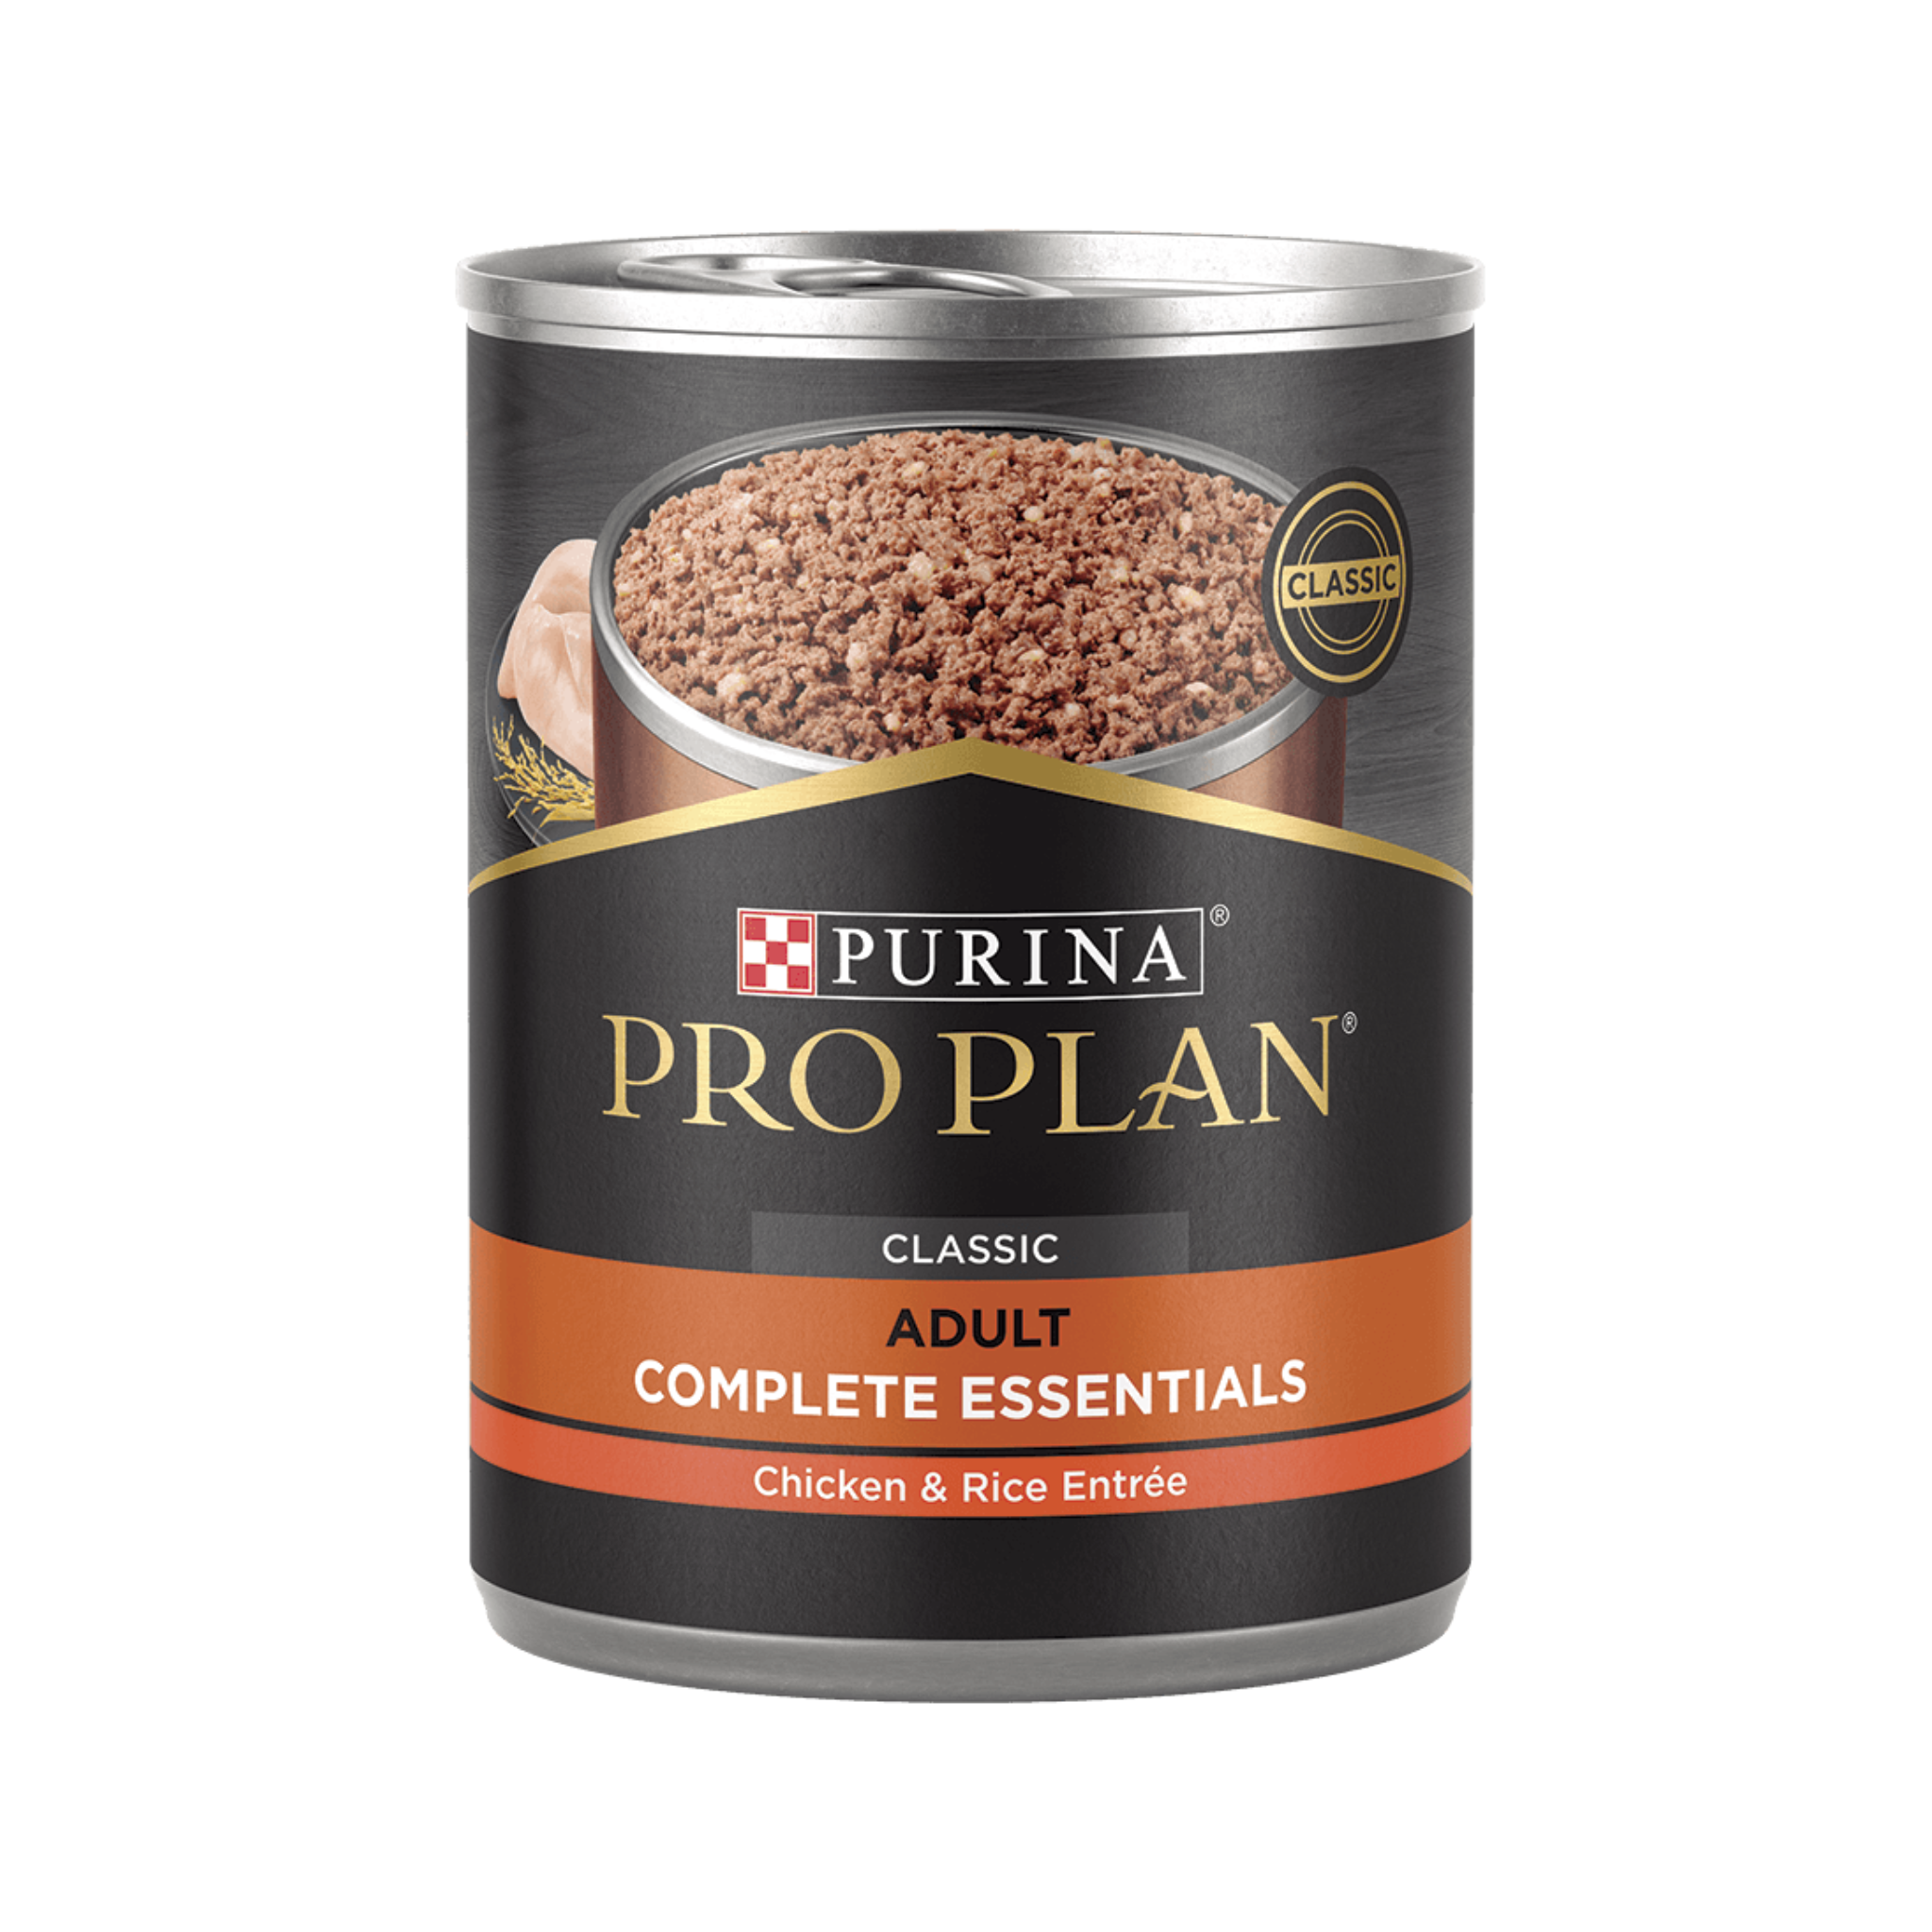 Pro Plan Complete Essentials Chicken & Rice Adult Dog Canned